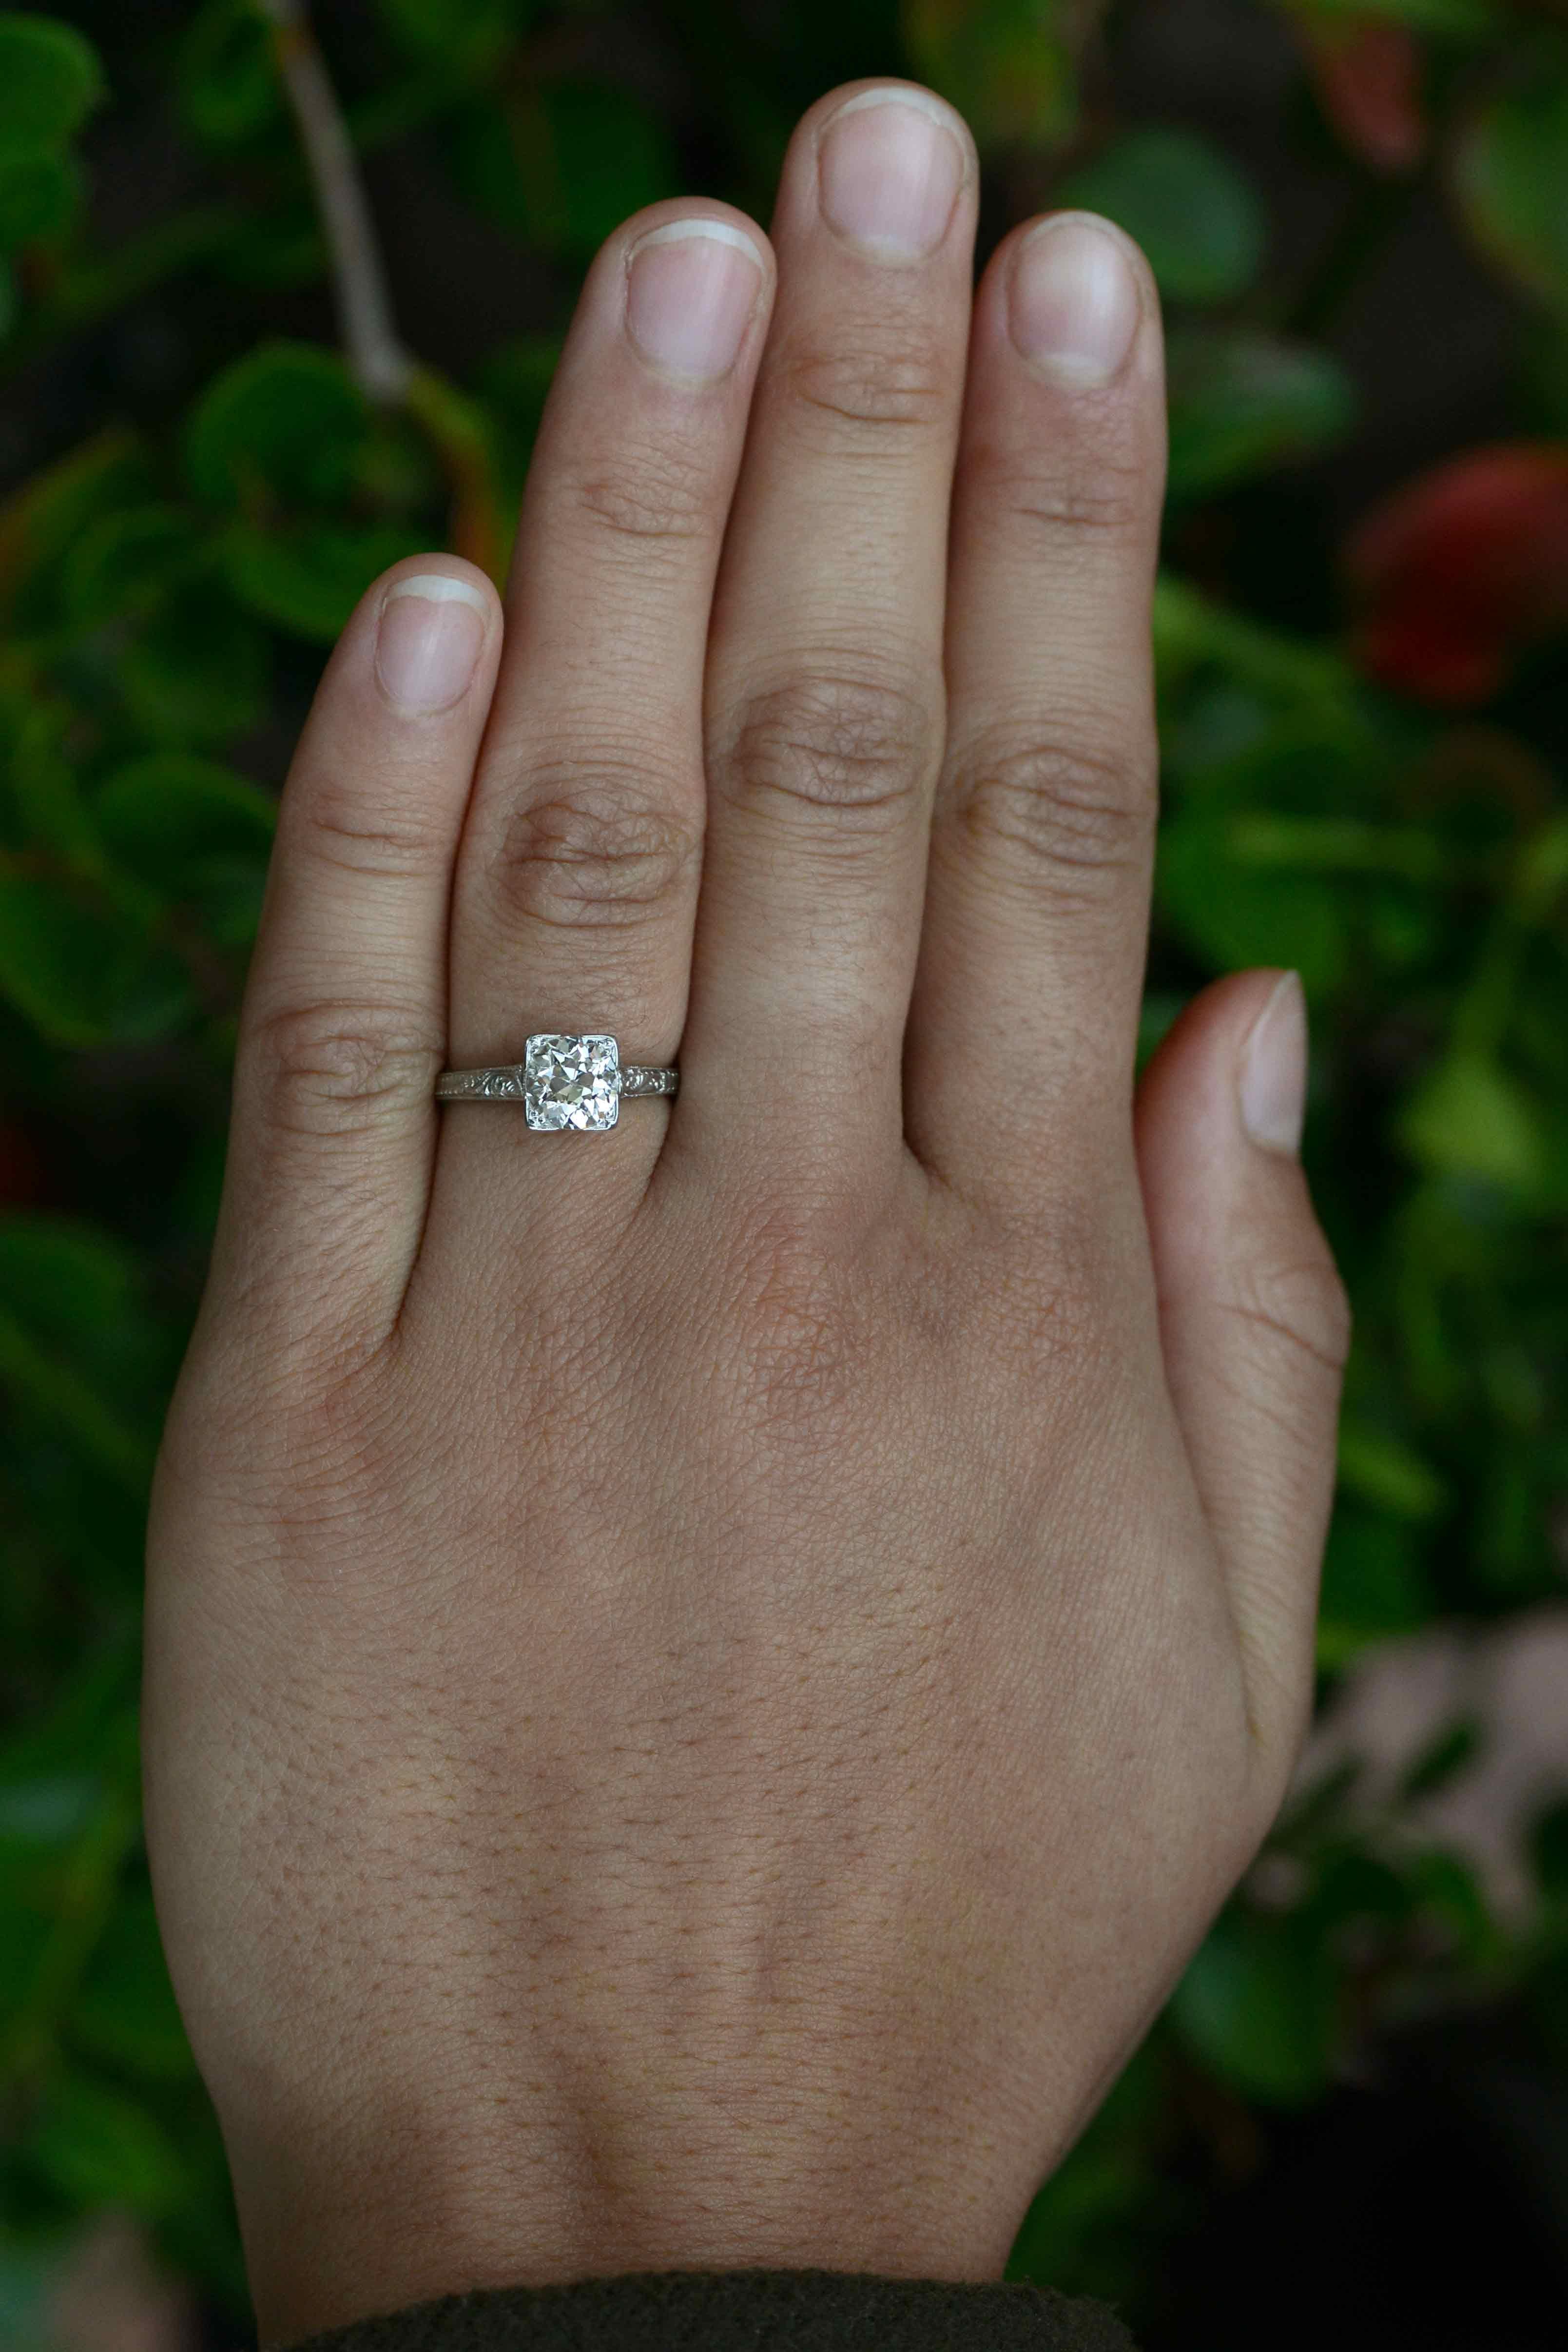 A timeless classic antique diamond solitaire engagement ring. The old mine cut diamond sparkles like a captivating prism with those chunky facets that explode brilliant light in every direction. Boasting a weight of 1.27 ct, and of a near colorless